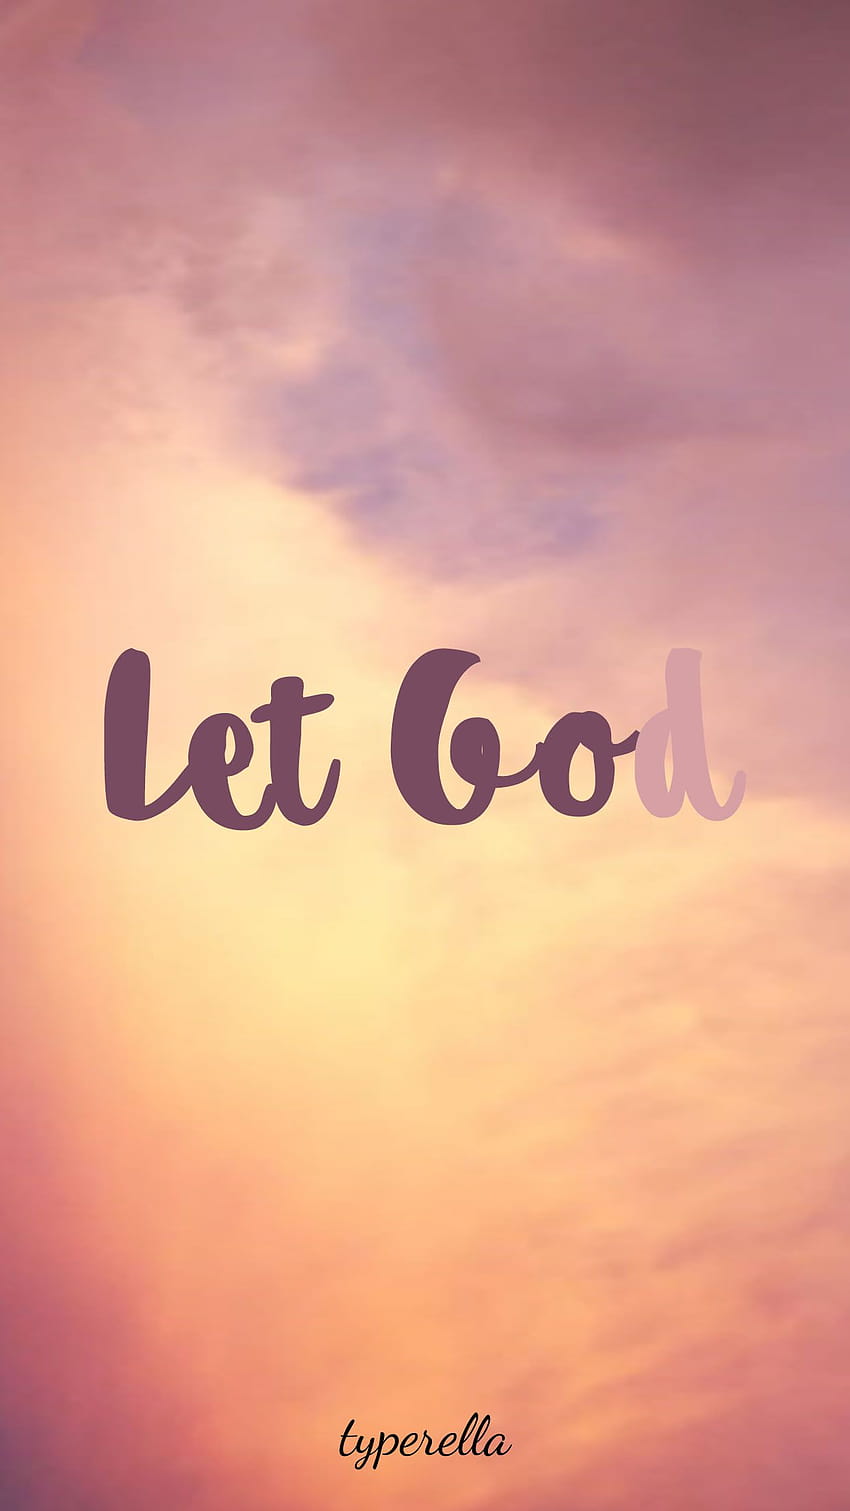 Let Go and Let God, Trust Him with all your heart., in god i trust iphone HD 전화 배경 화면